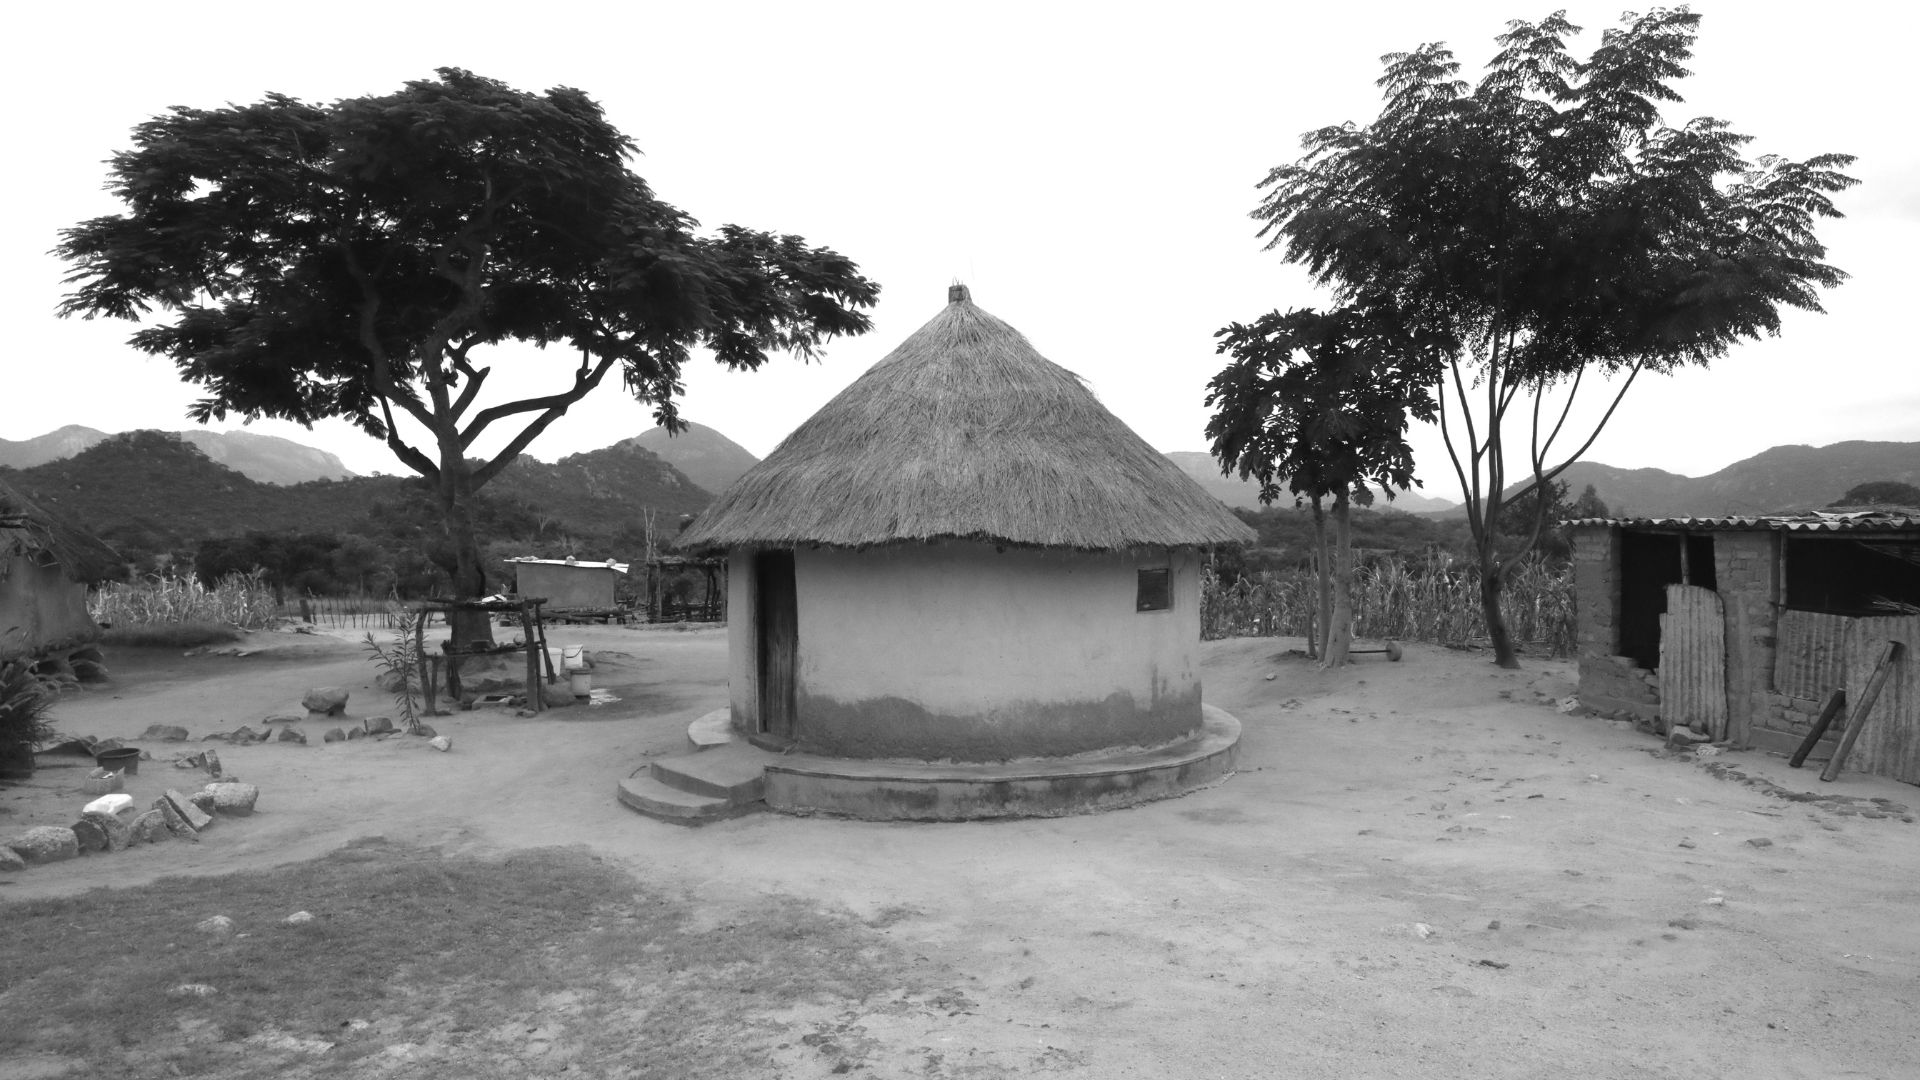 Photo of a hut in the middle of a clearing in Africa